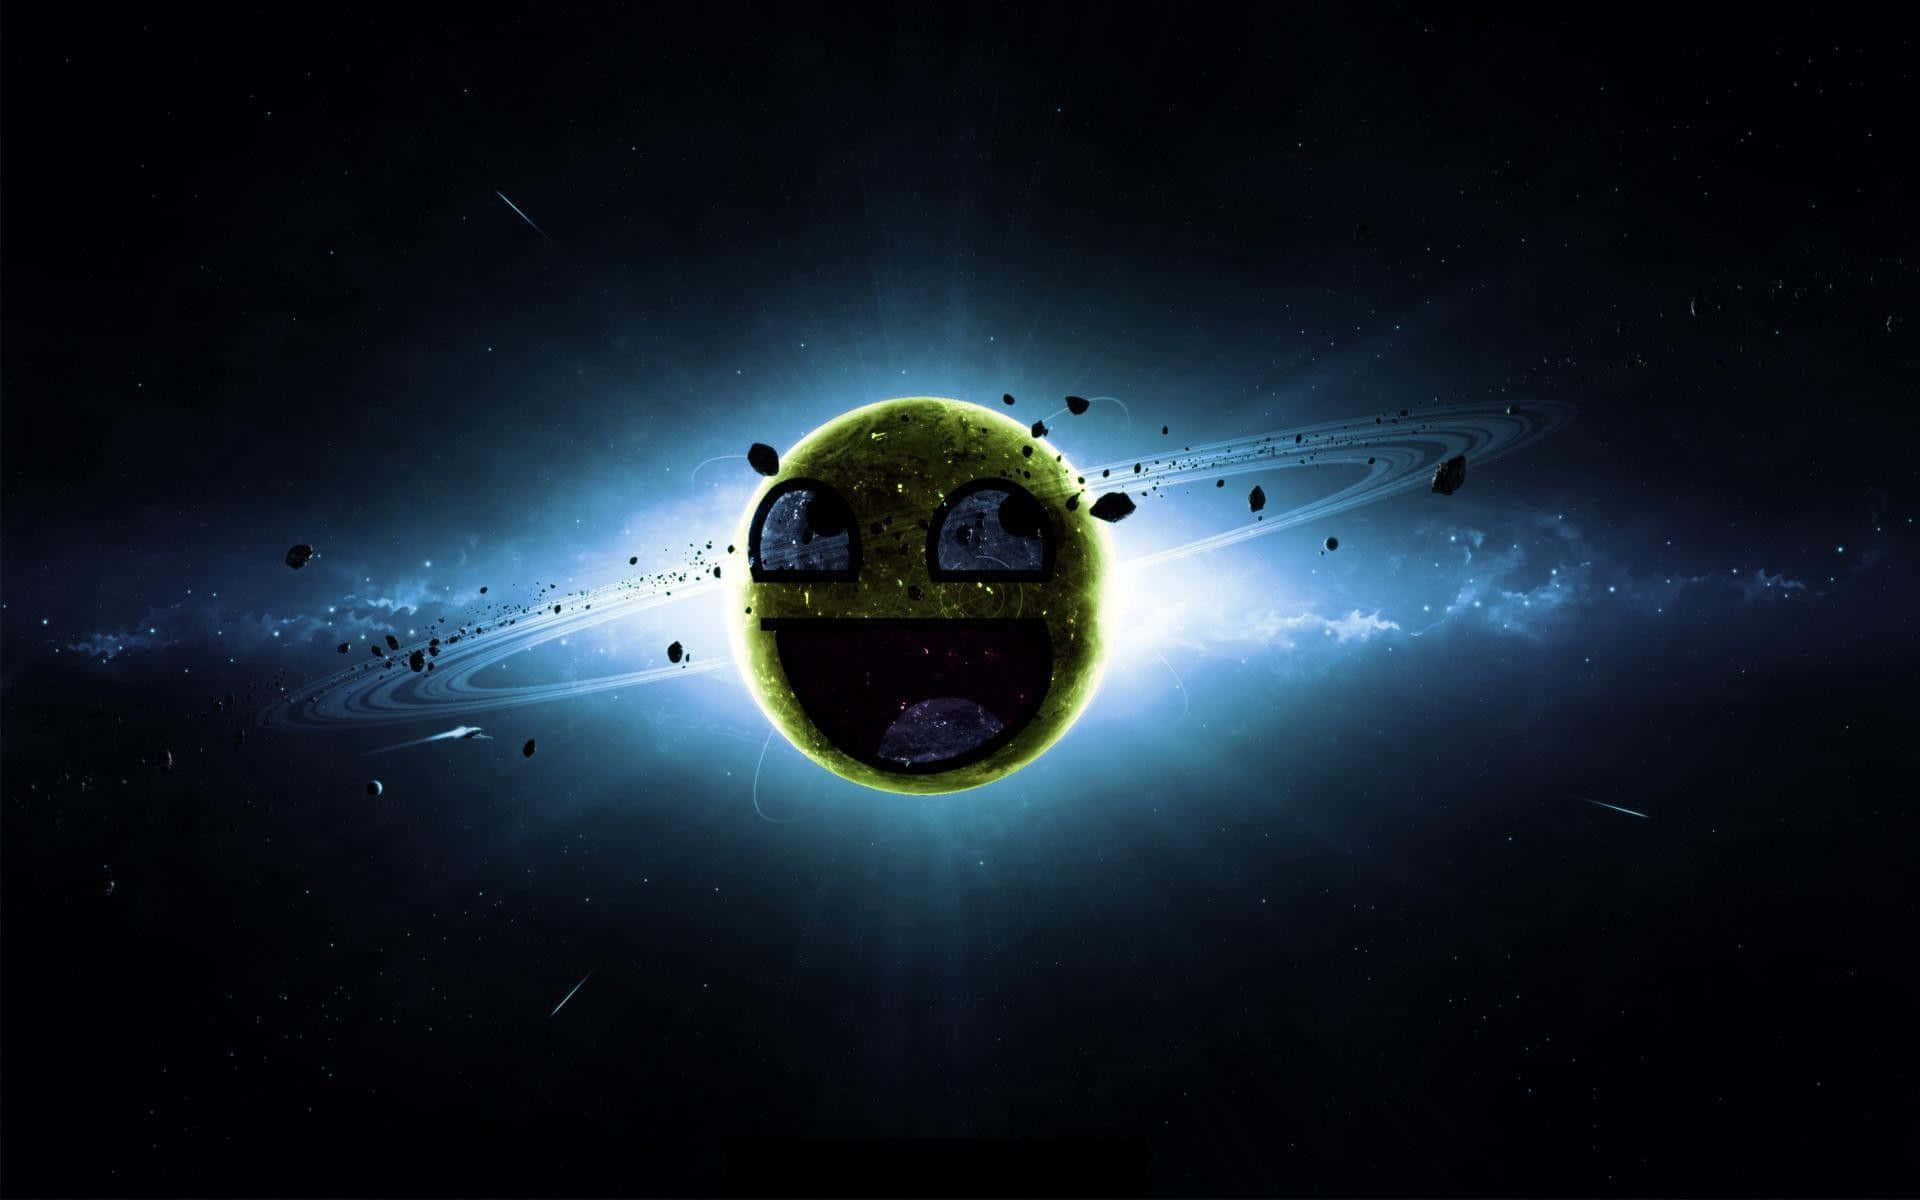 awesome face space background